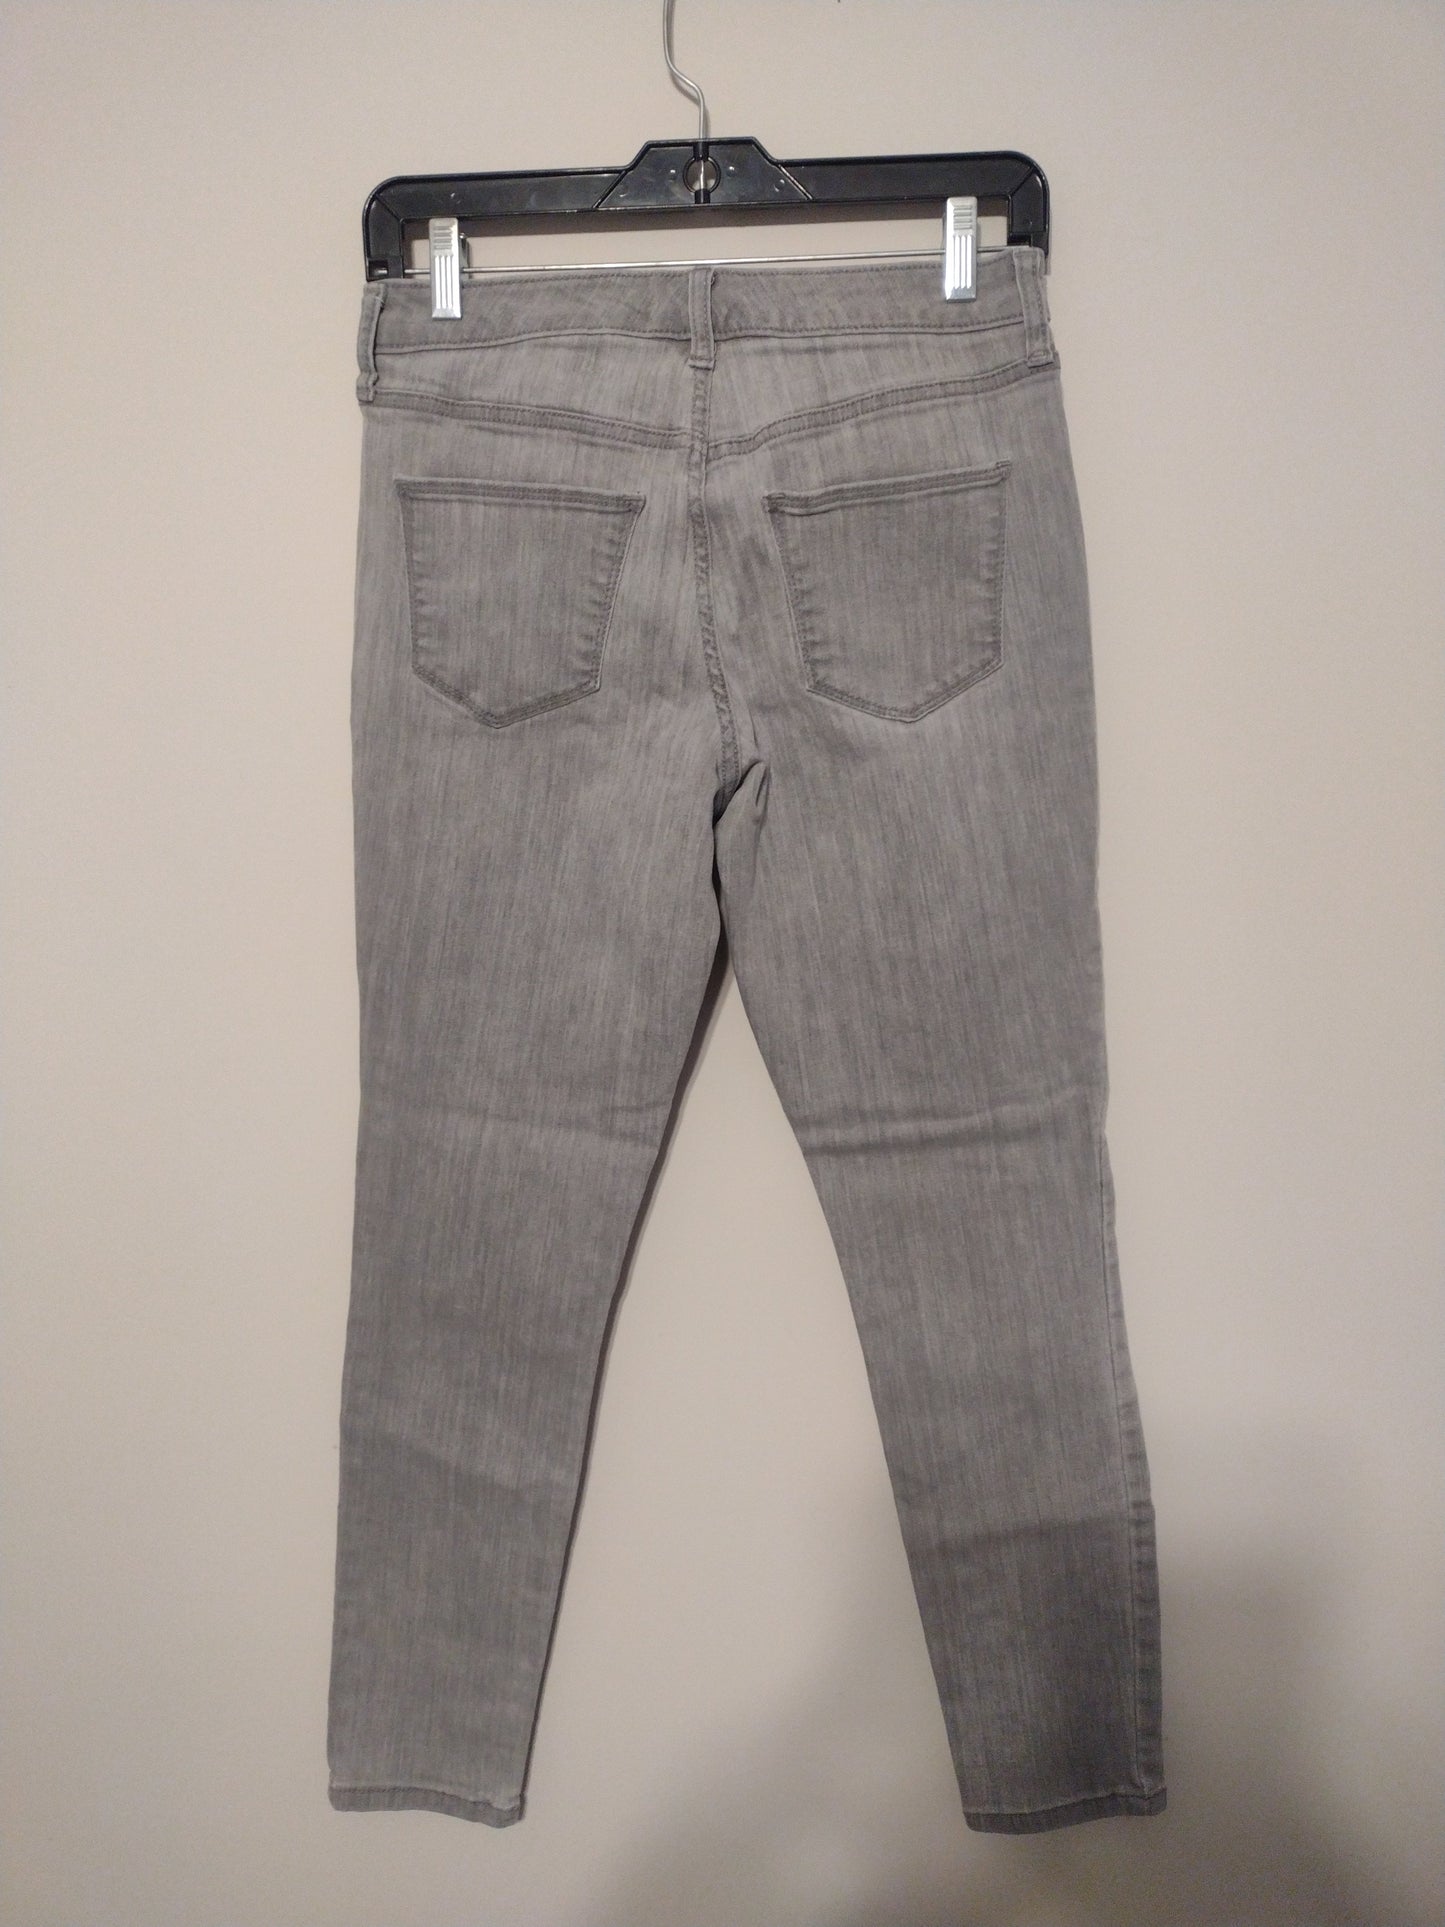 Jeans Skinny By Universal Thread  Size: 6